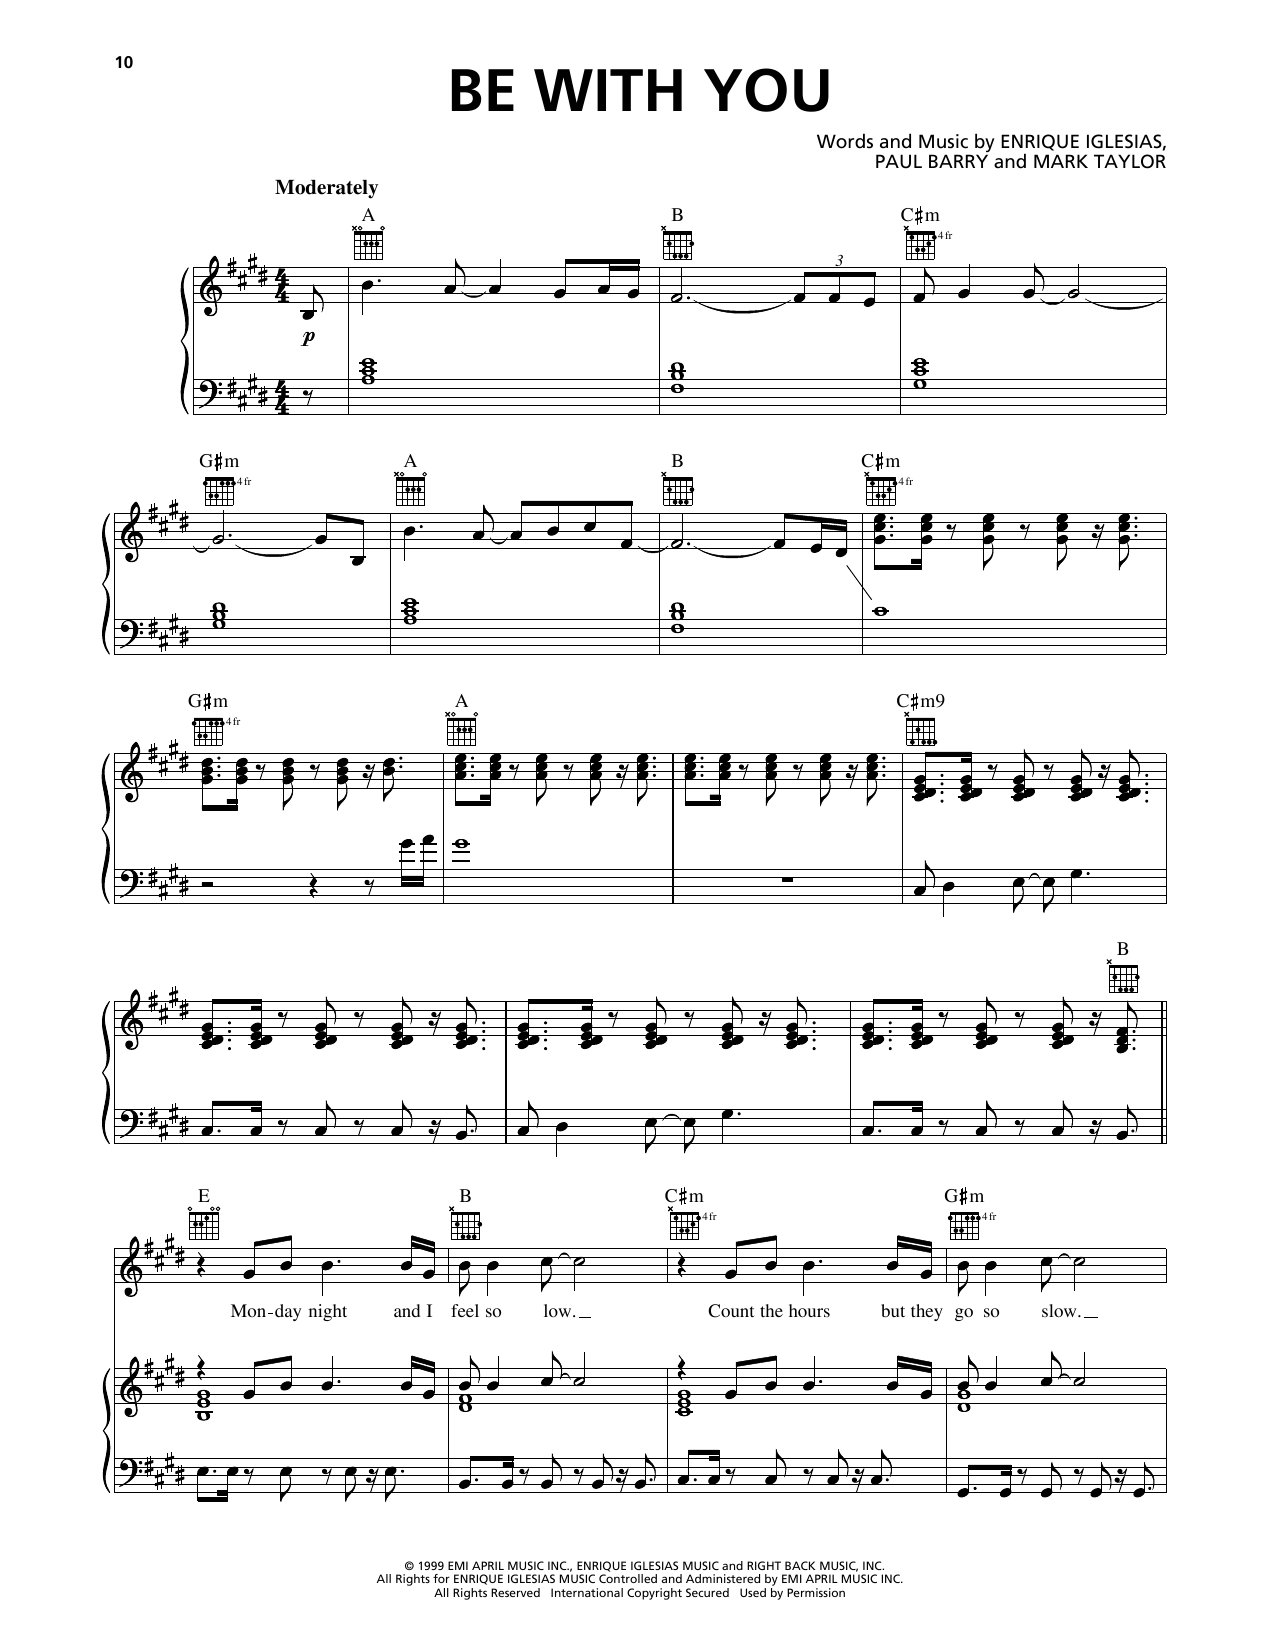 Download Enrique Iglesias Be With You Sheet Music